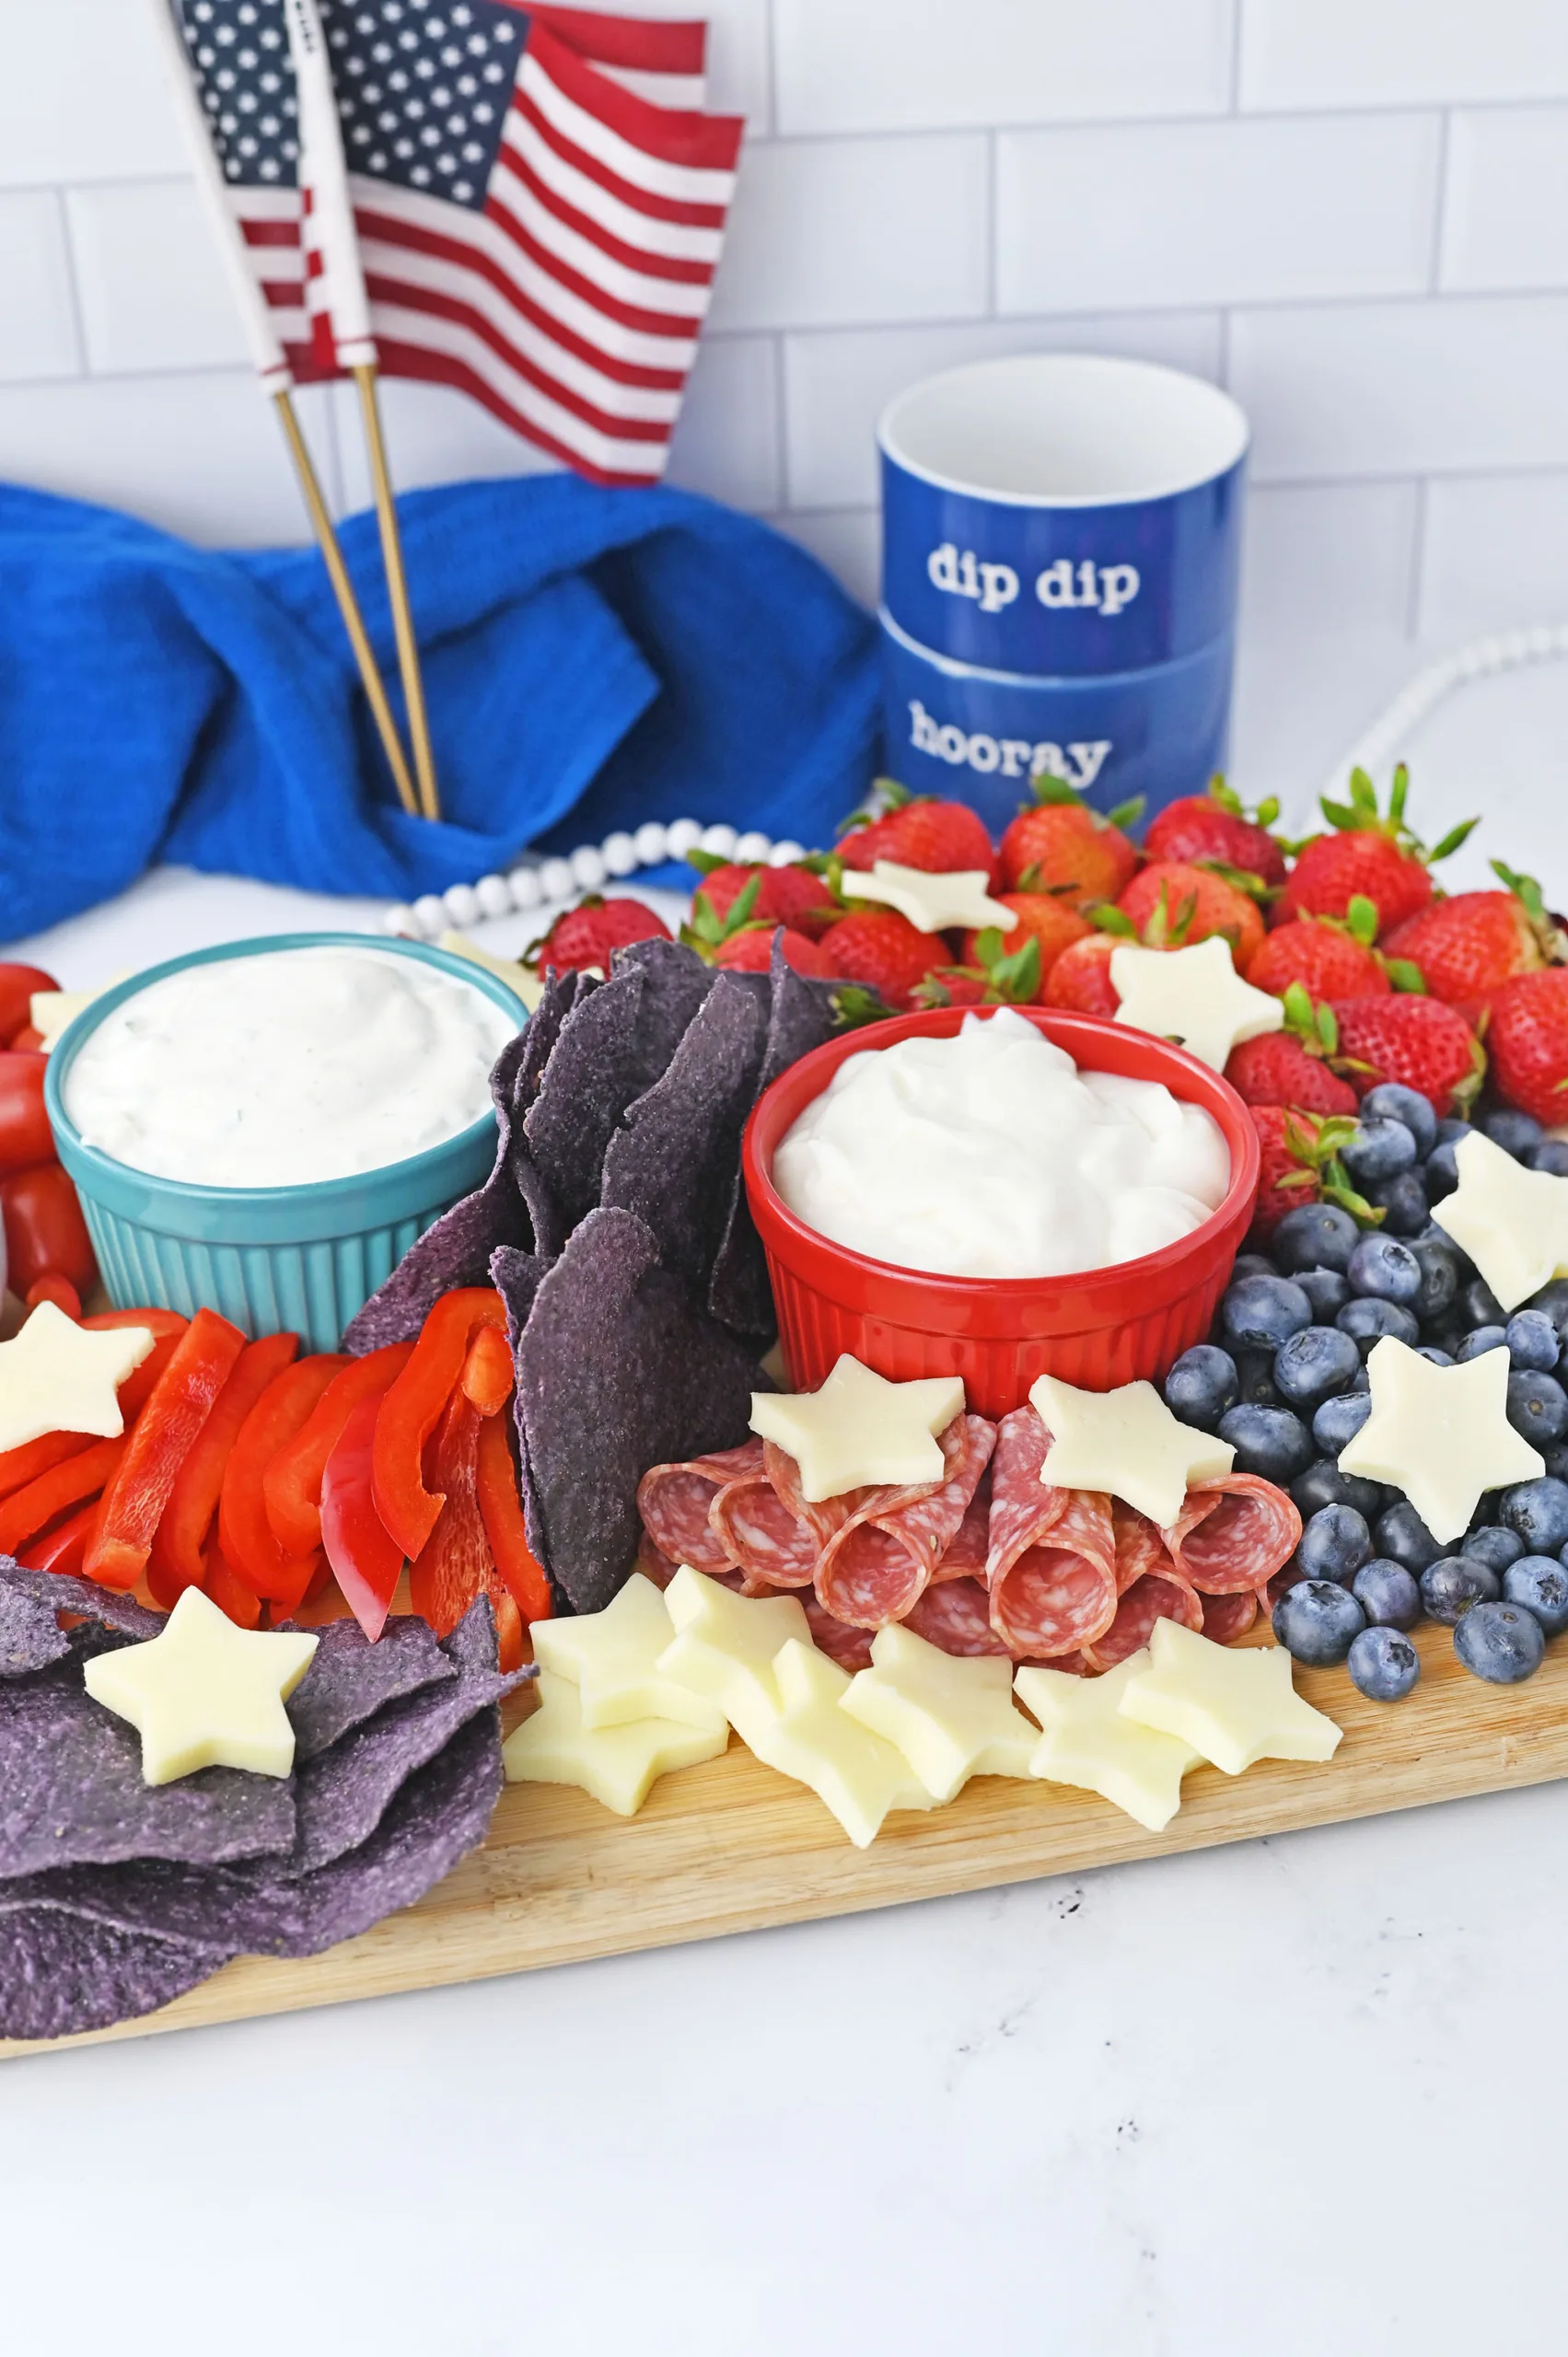 Patriotic Charcuterie Board from Making Mom Magic